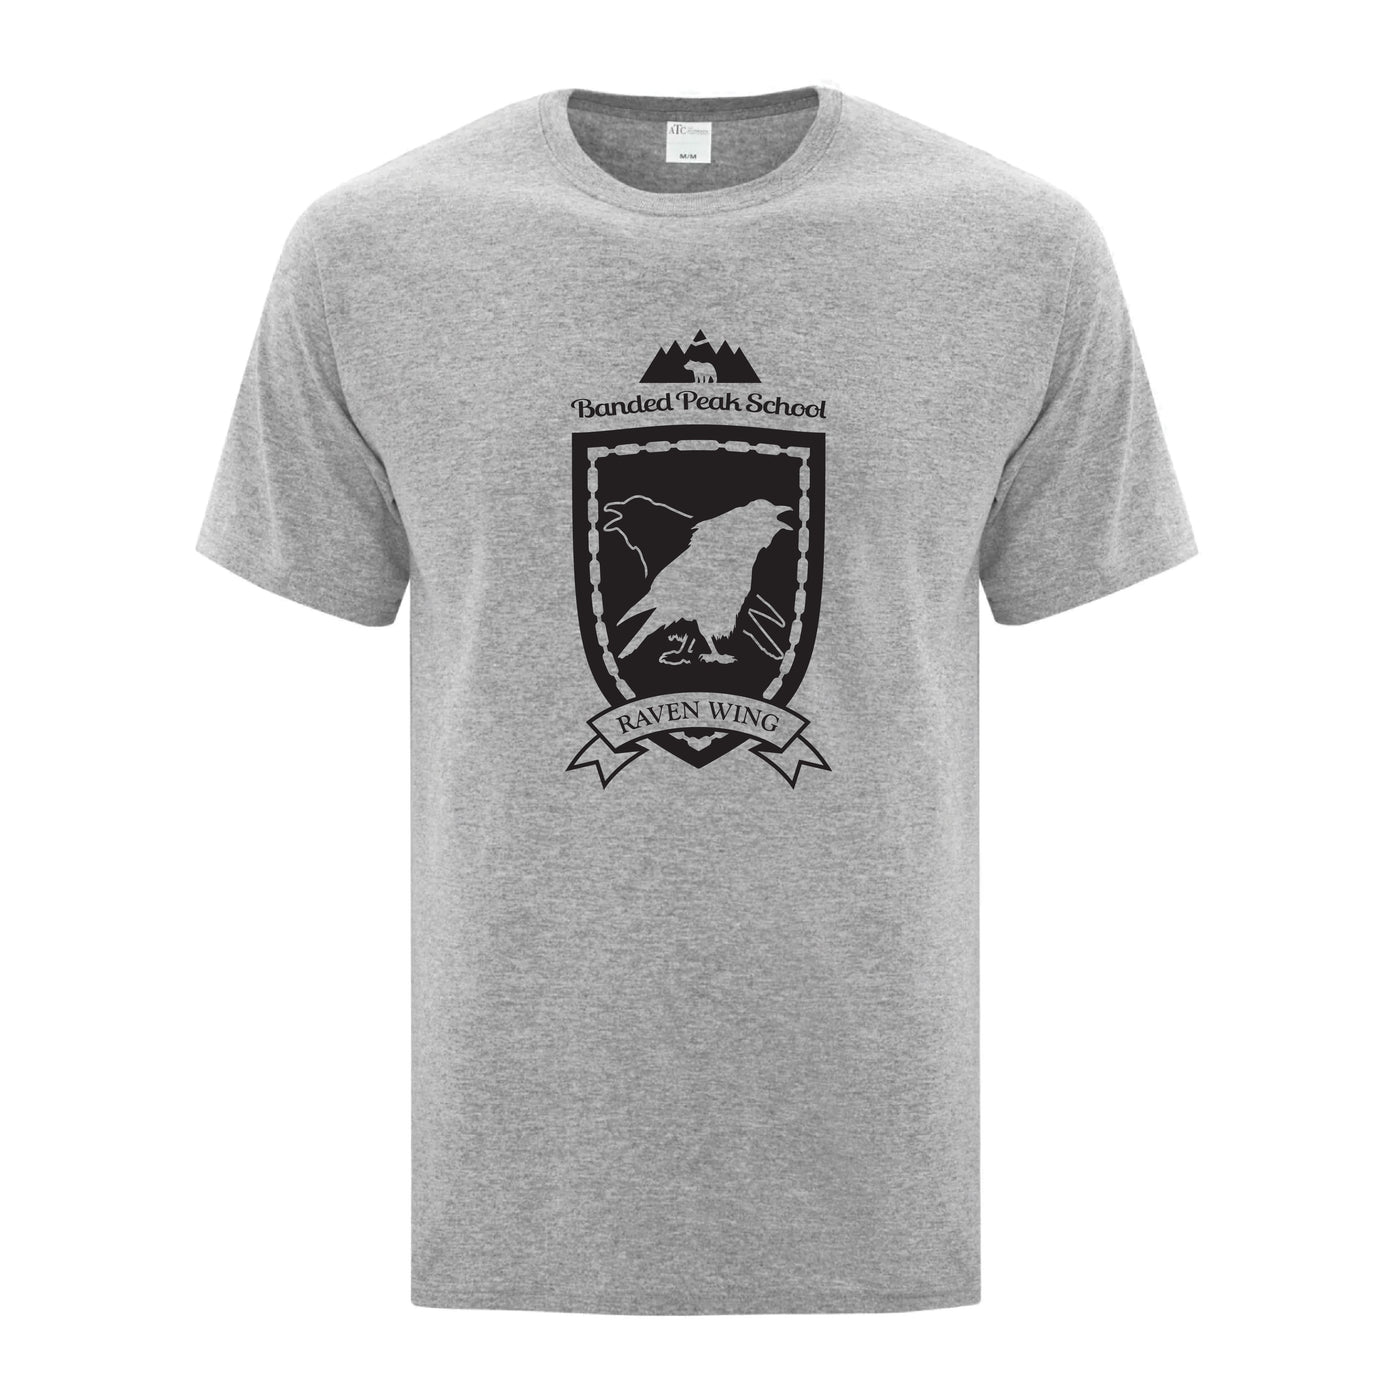 Banded Peak School - Raven Wing House Tee - Technical T-Shirt